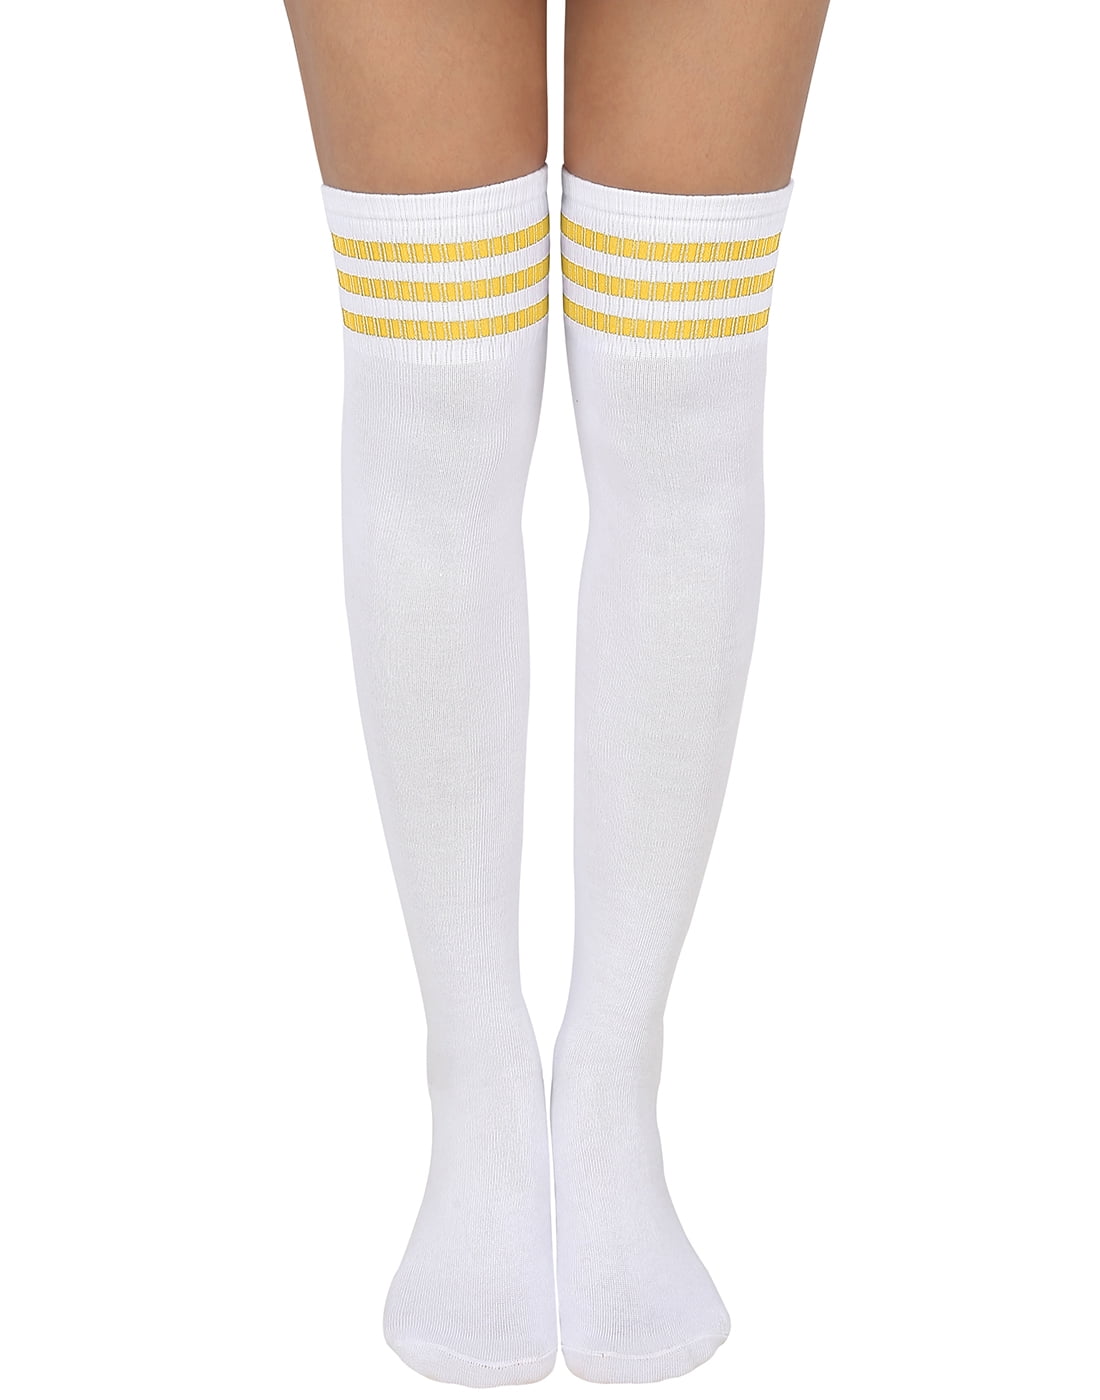 Women 4 Pairs Cotton Three Striped Over Knee High Casual Sport Tube Socks WST 04 